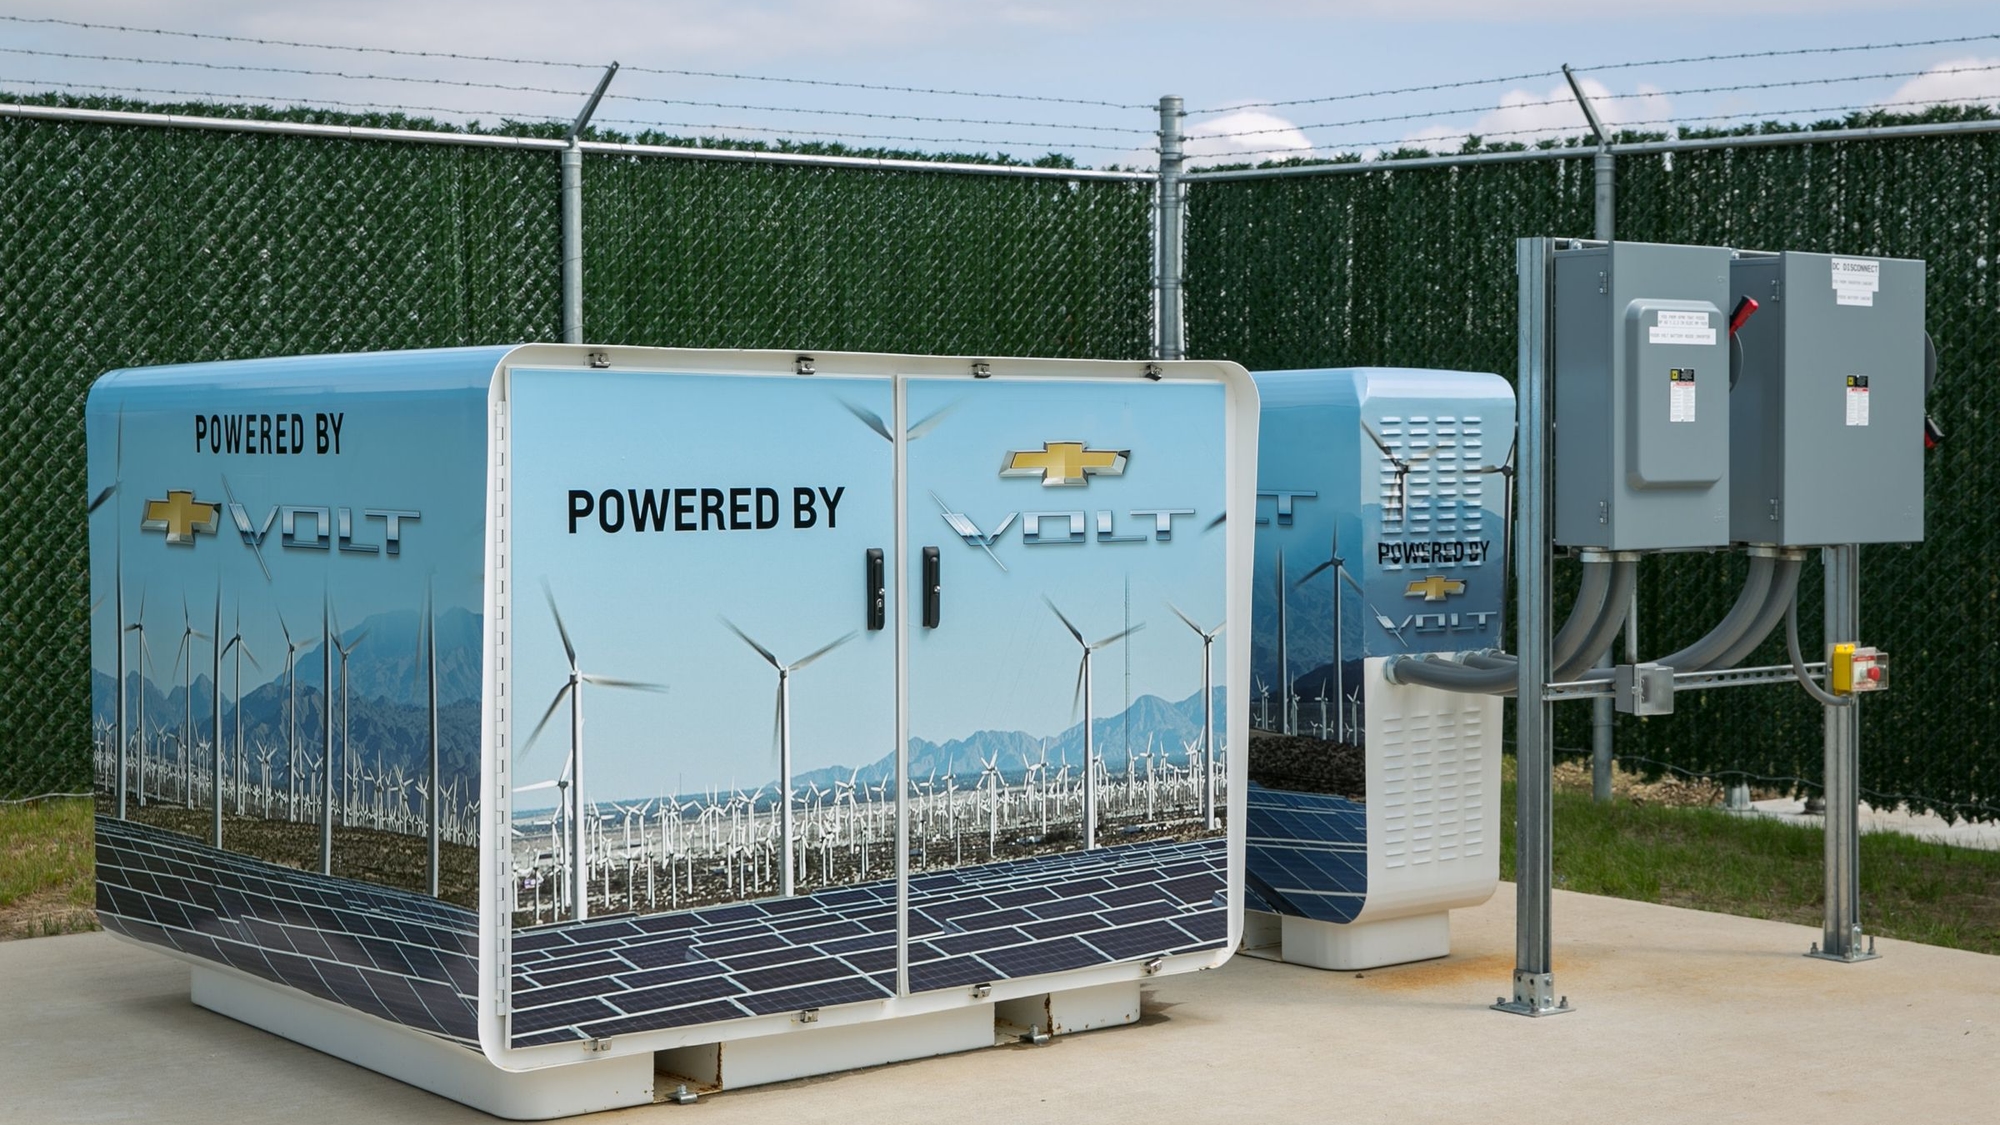 Used Chevrolet Volt batteries for energy storage at GM facility in Milford, Michigan